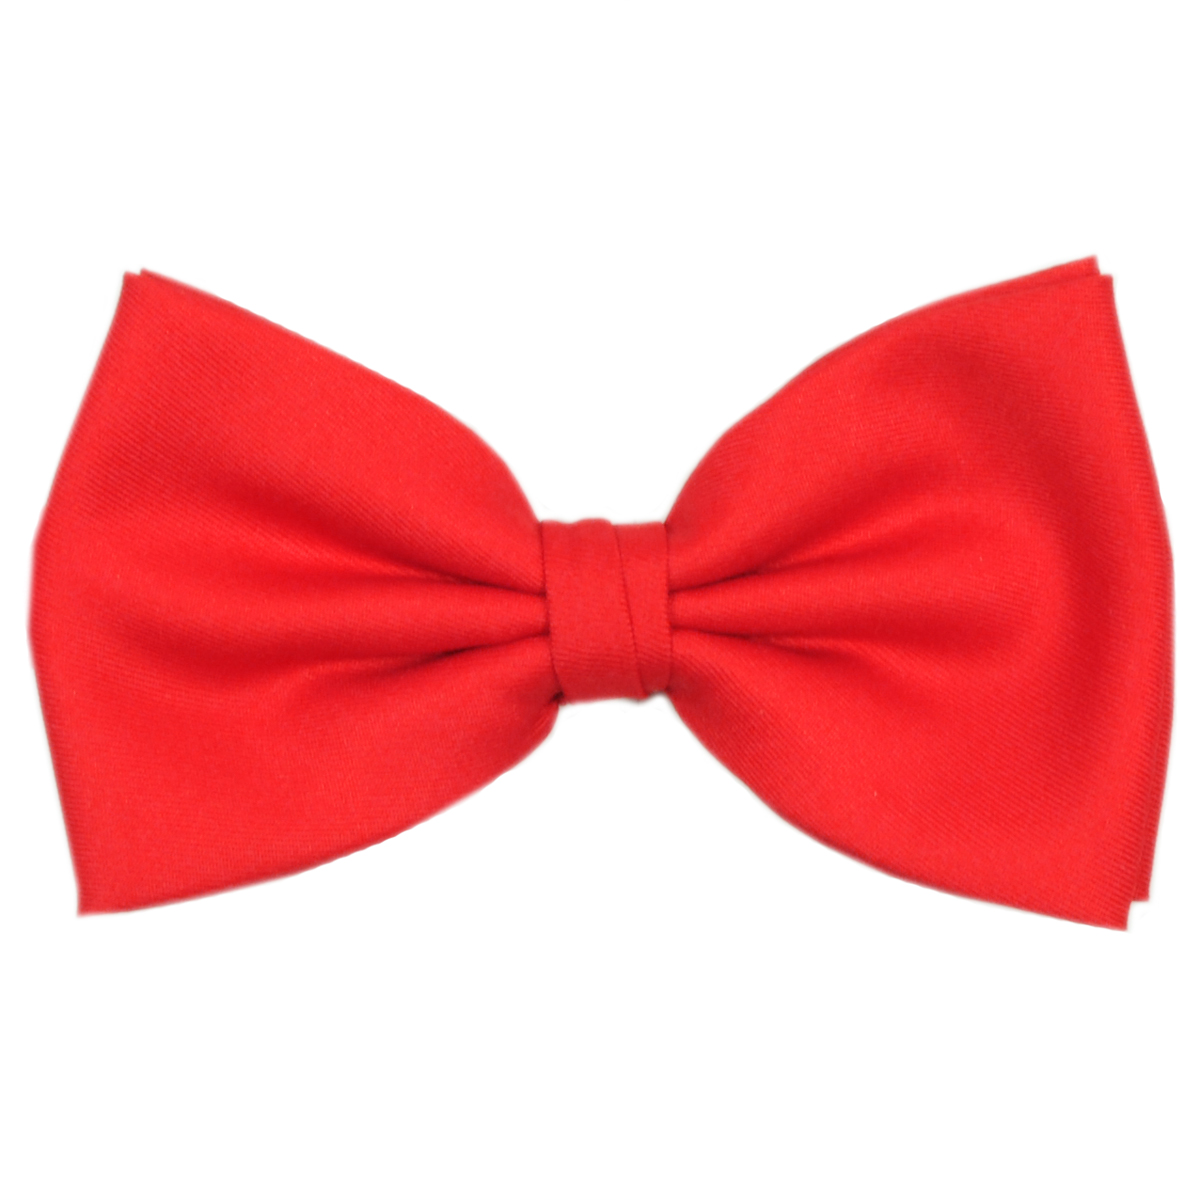 bow tie clipart images - photo #16